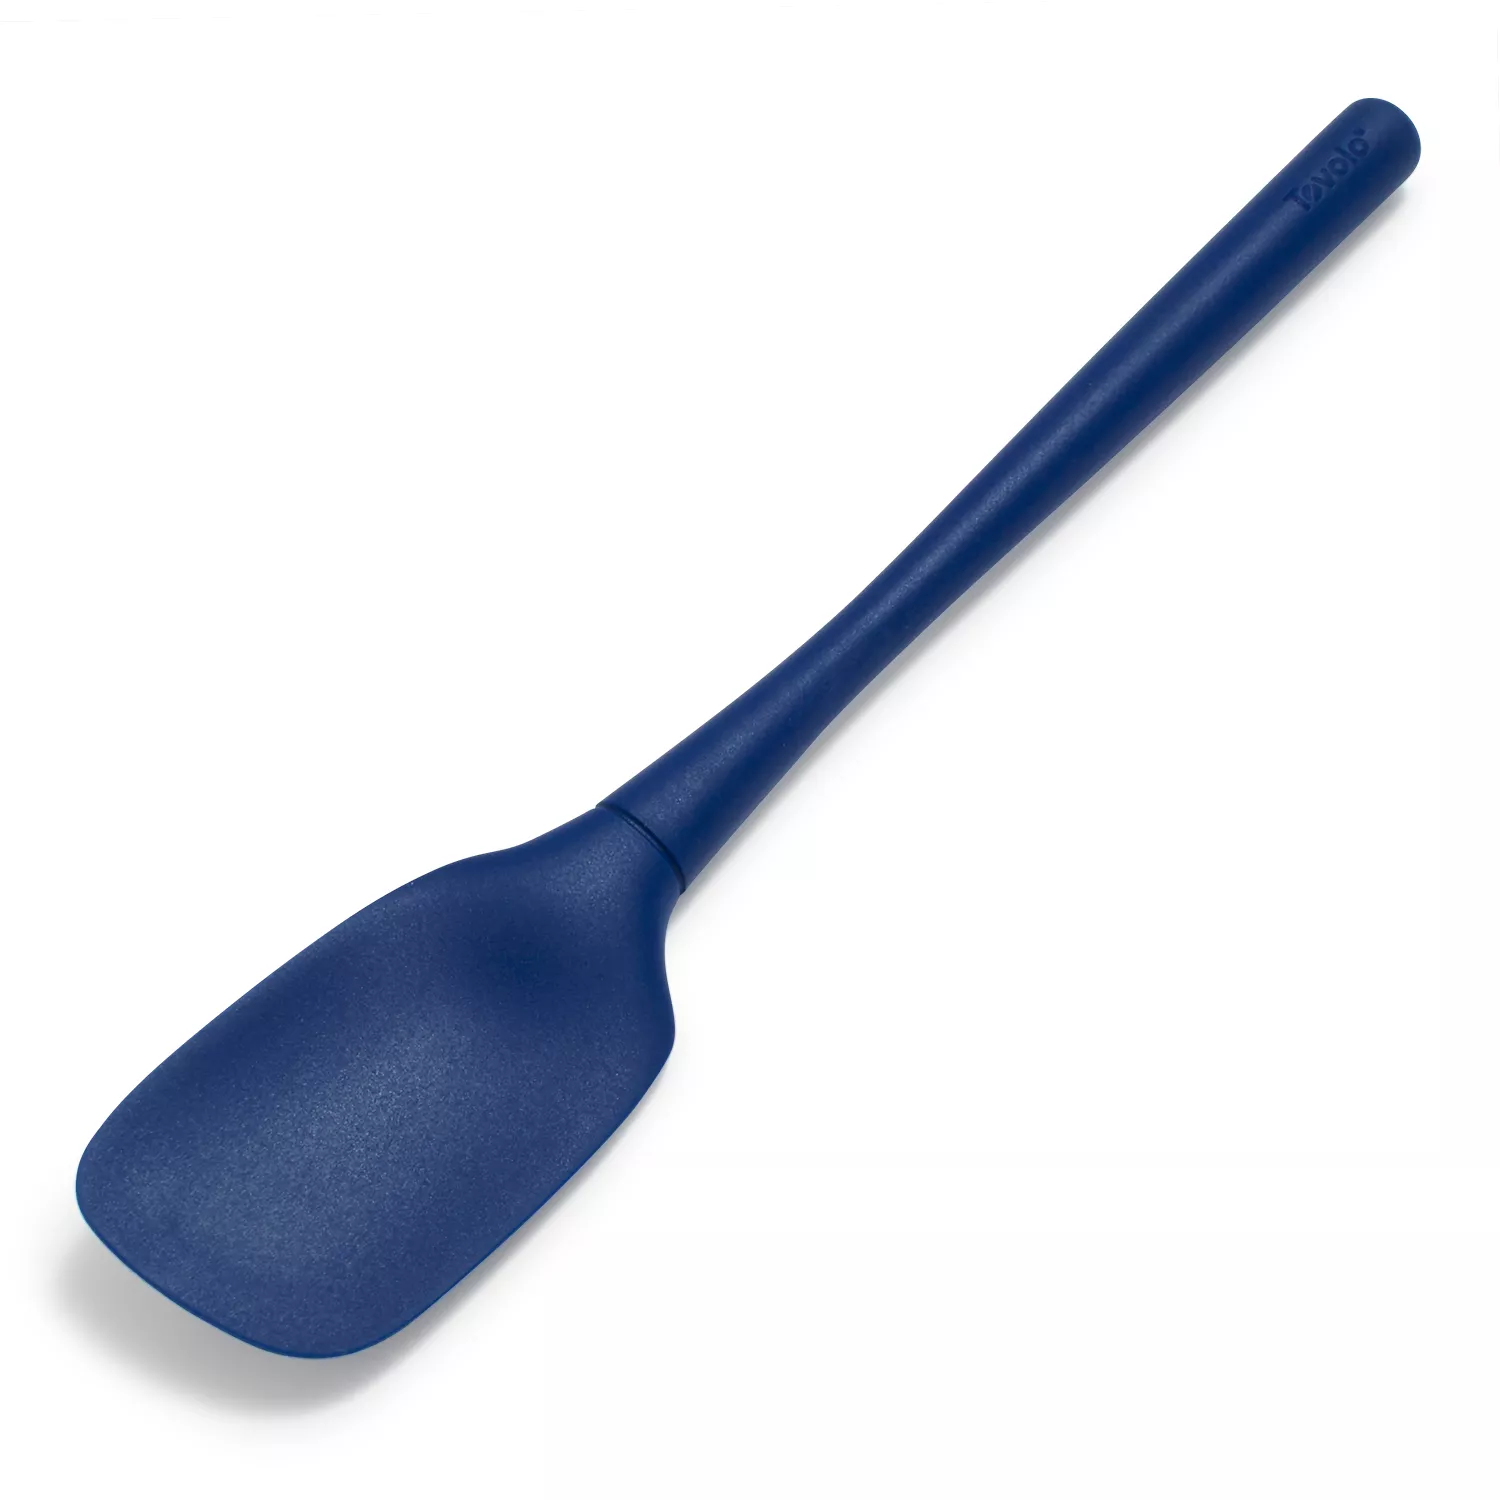 Sur La Table Flex-Core Silicone Spatula Spoon with Stainless Steel Handle